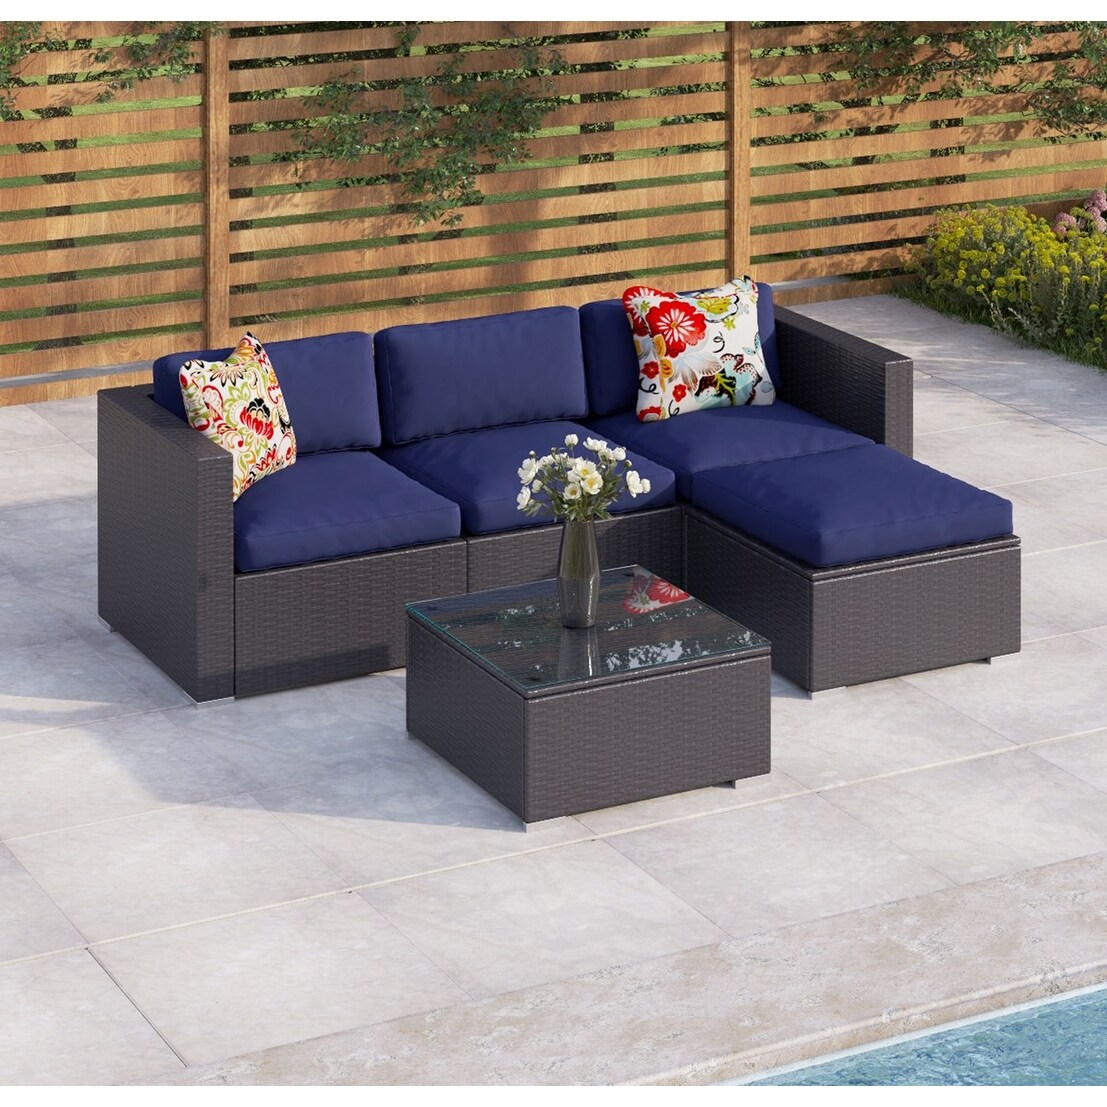 MakeYourDay 13-Piece Outdoor Sectional Sofa Set Patio Conversation Set with Fire Pit Table and Coffee Table